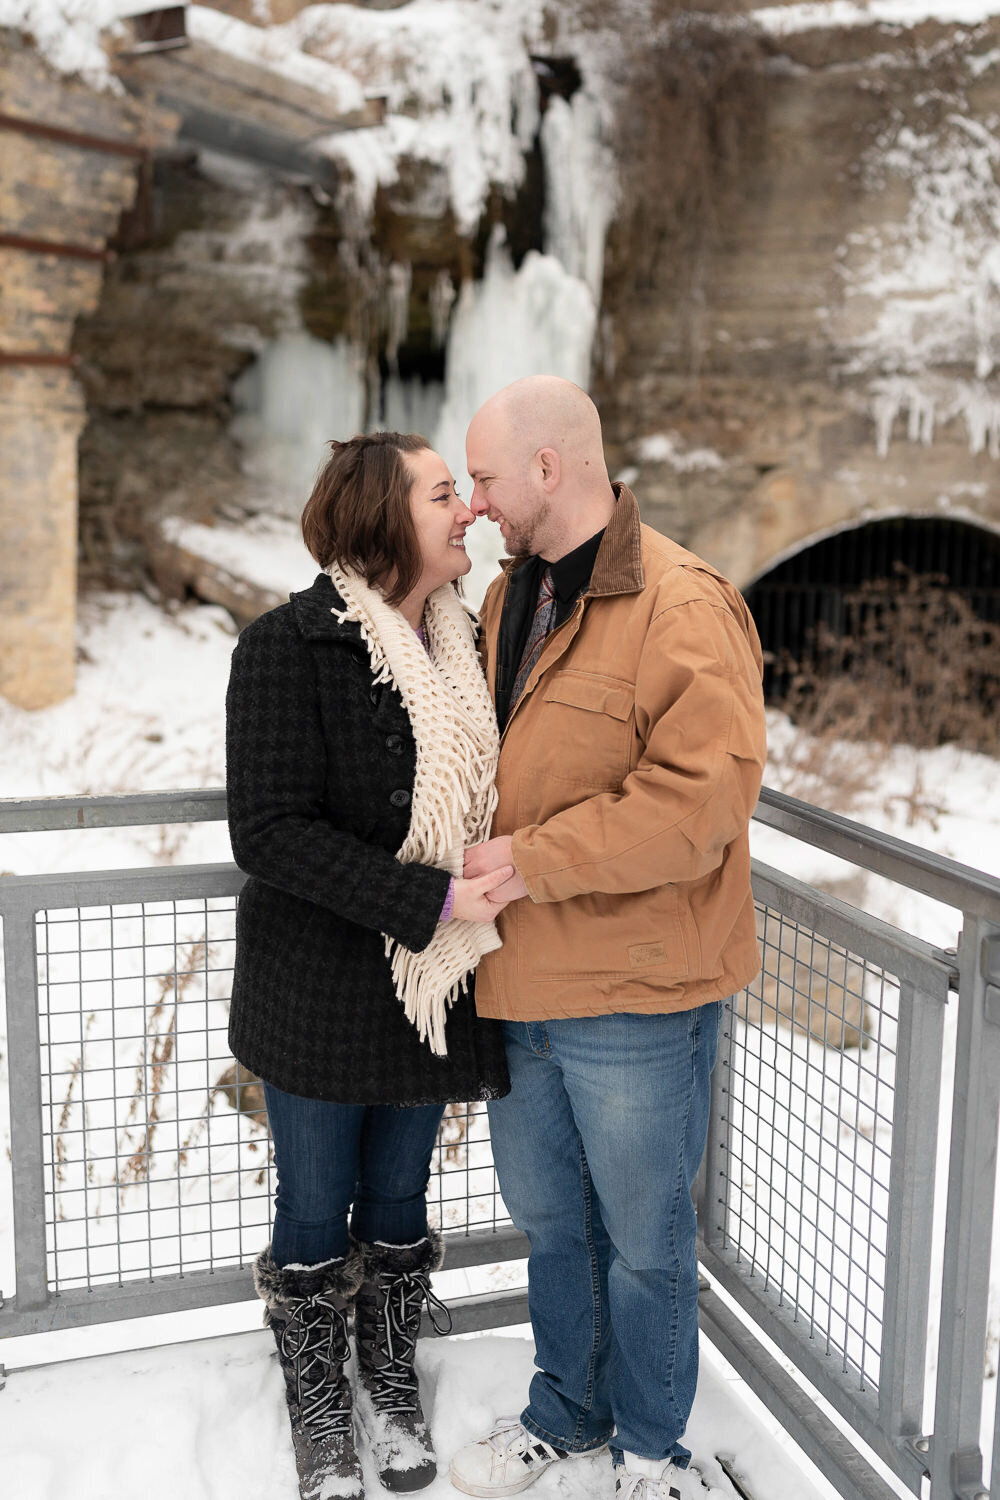 Man and woman in jeans and jackets smile in front of frozen waterfall in Minneapolis, Minnesota.